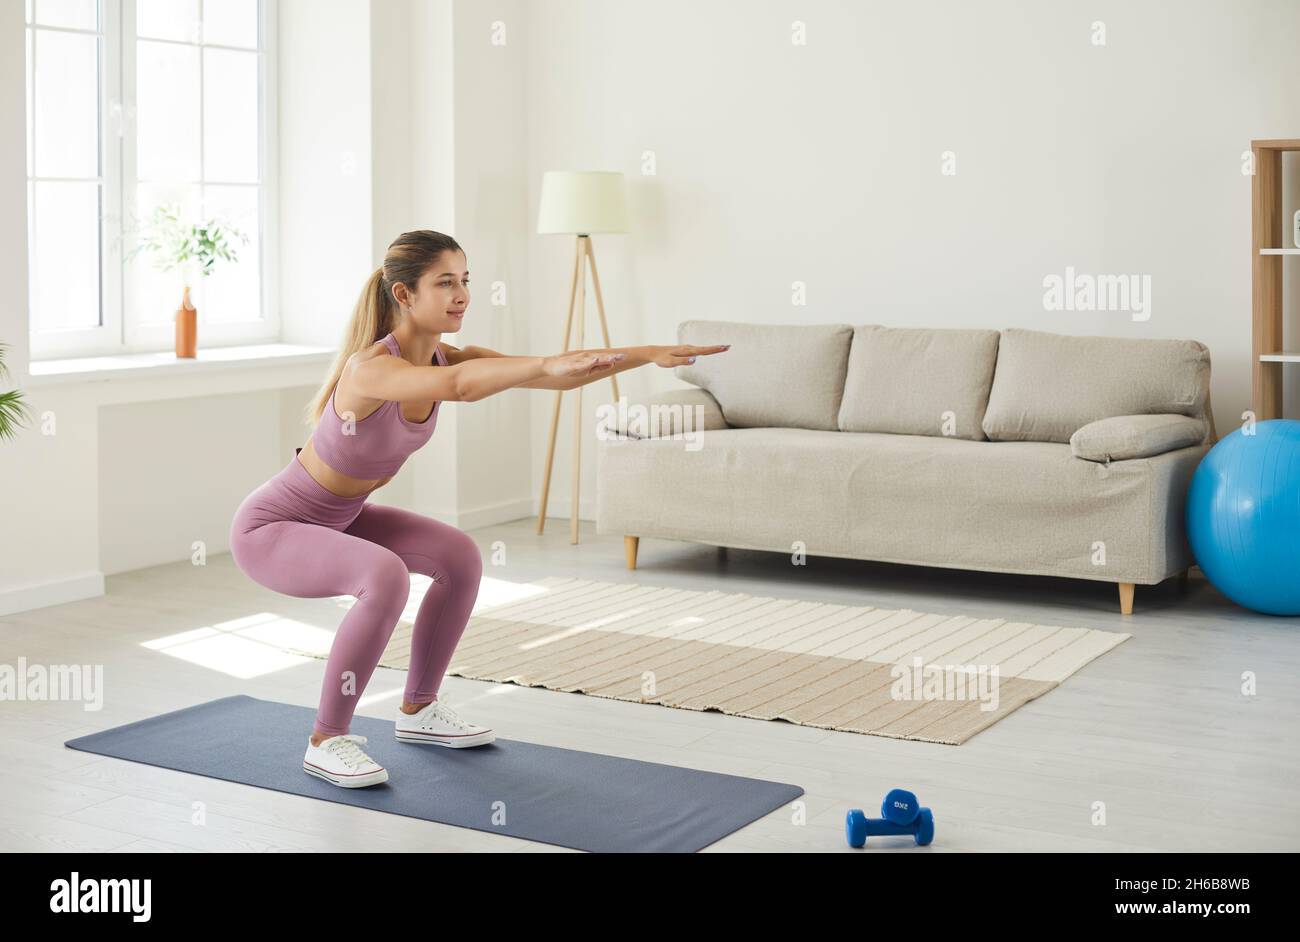 Young enduring woman trains at home doing deep squats with her arms outstretched. Stock Photo